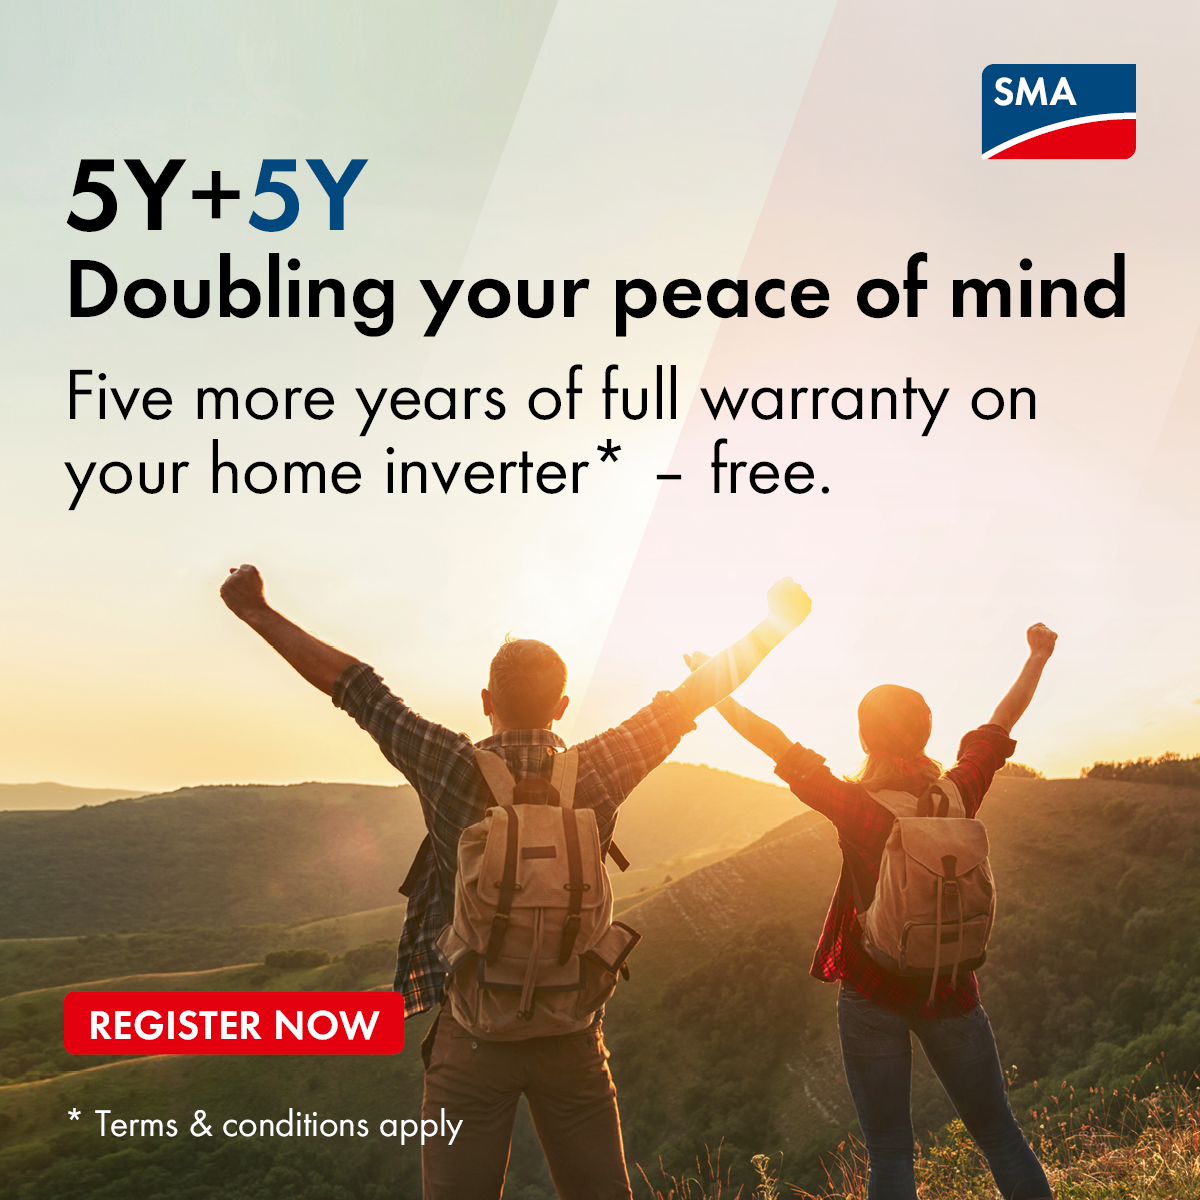 SMA Australia offering FREE 10 years warranty on home inverters